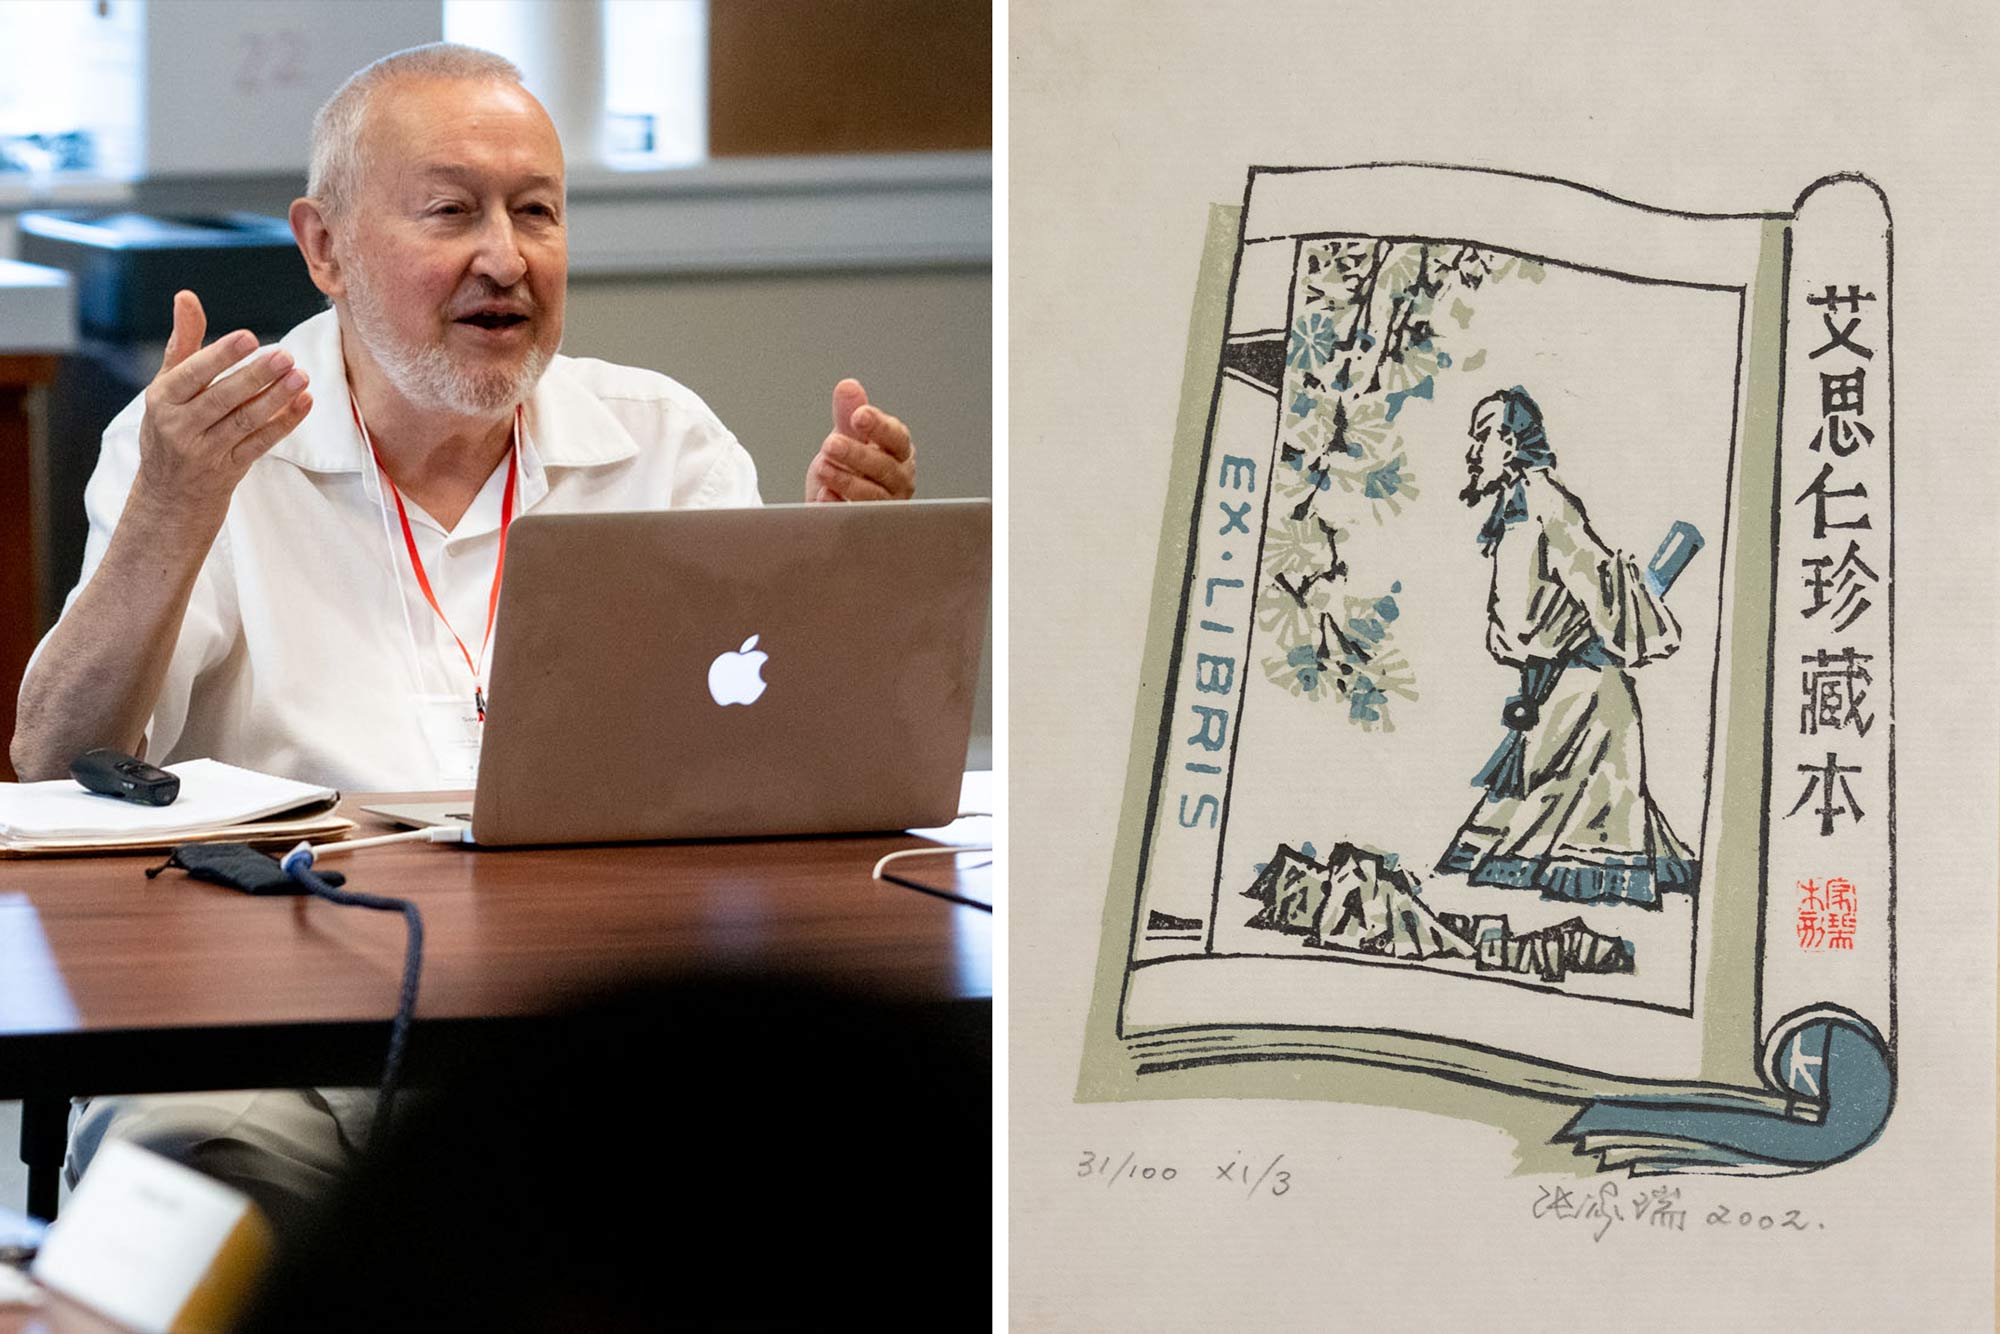 Side by side photos of Professor Edgren and a custom bookplate that illustrates him standing sideways in a book.